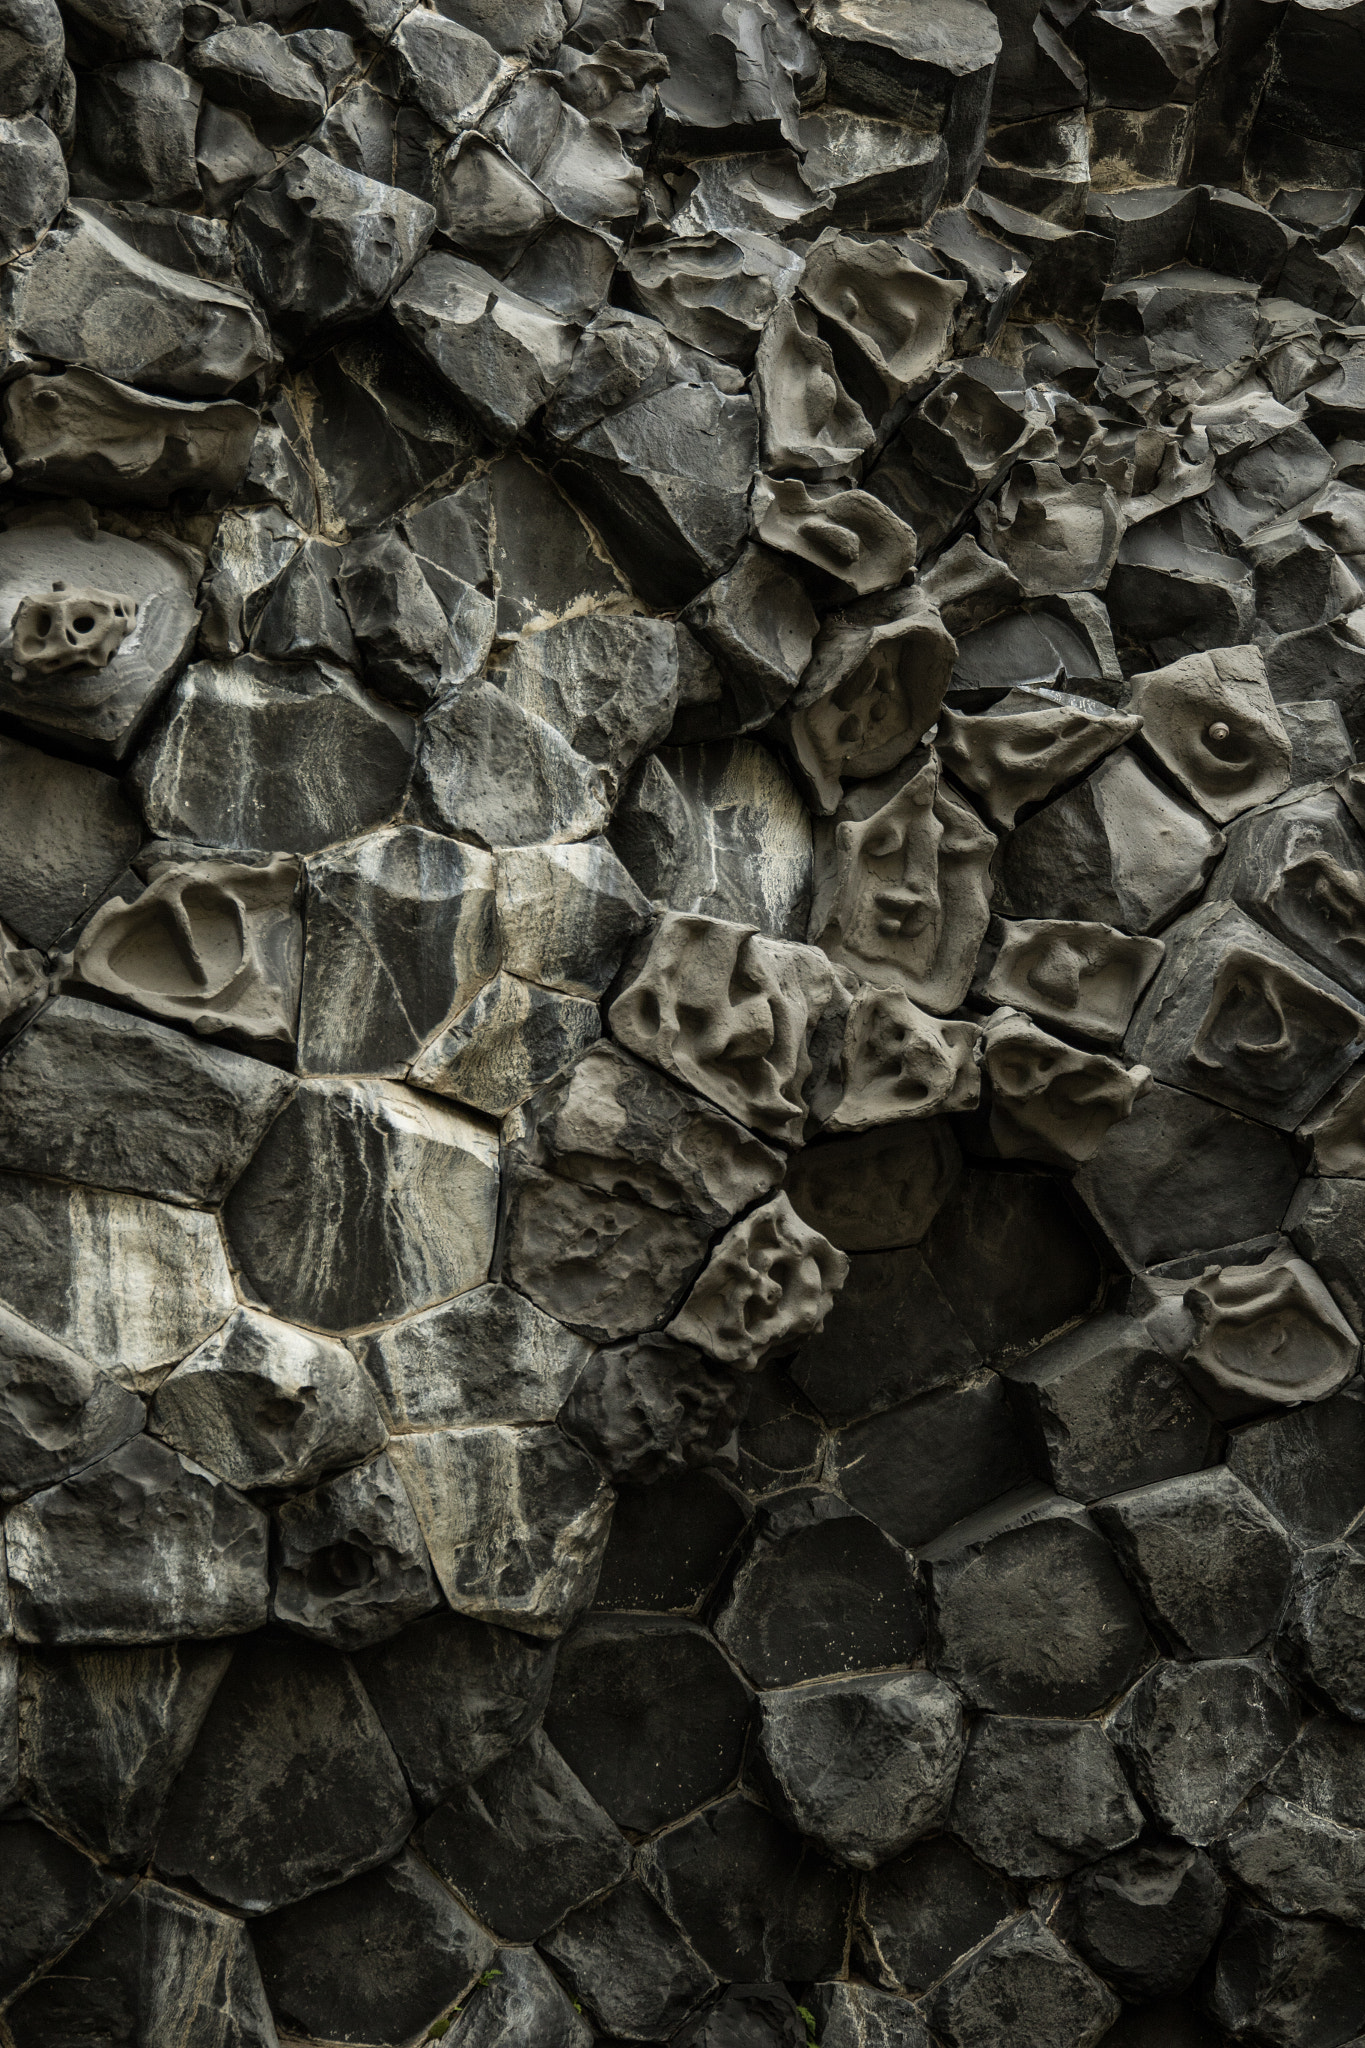 Canon EOS 7D Mark II + Sigma 24-105mm f/4 DG OS HSM | A sample photo. Stones iceland photography